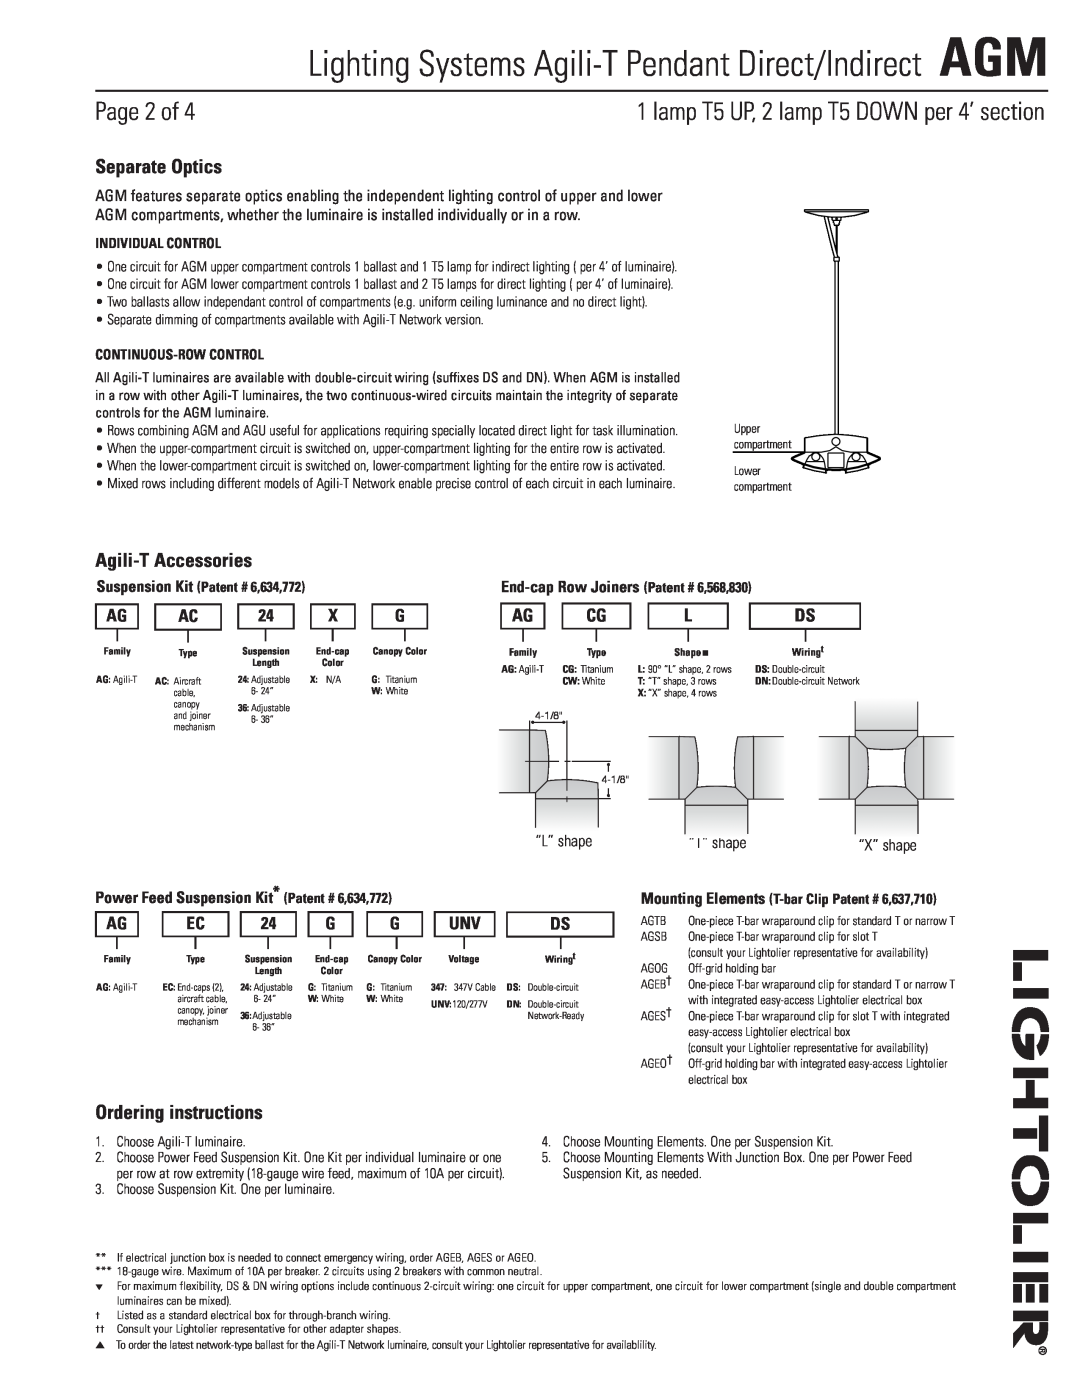 Lightolier AGM manual Page 2 of, lamp T5 UP, 2 lamp T5 DOWN per 4’ section, Separate Optics, Agili-TAccessories 